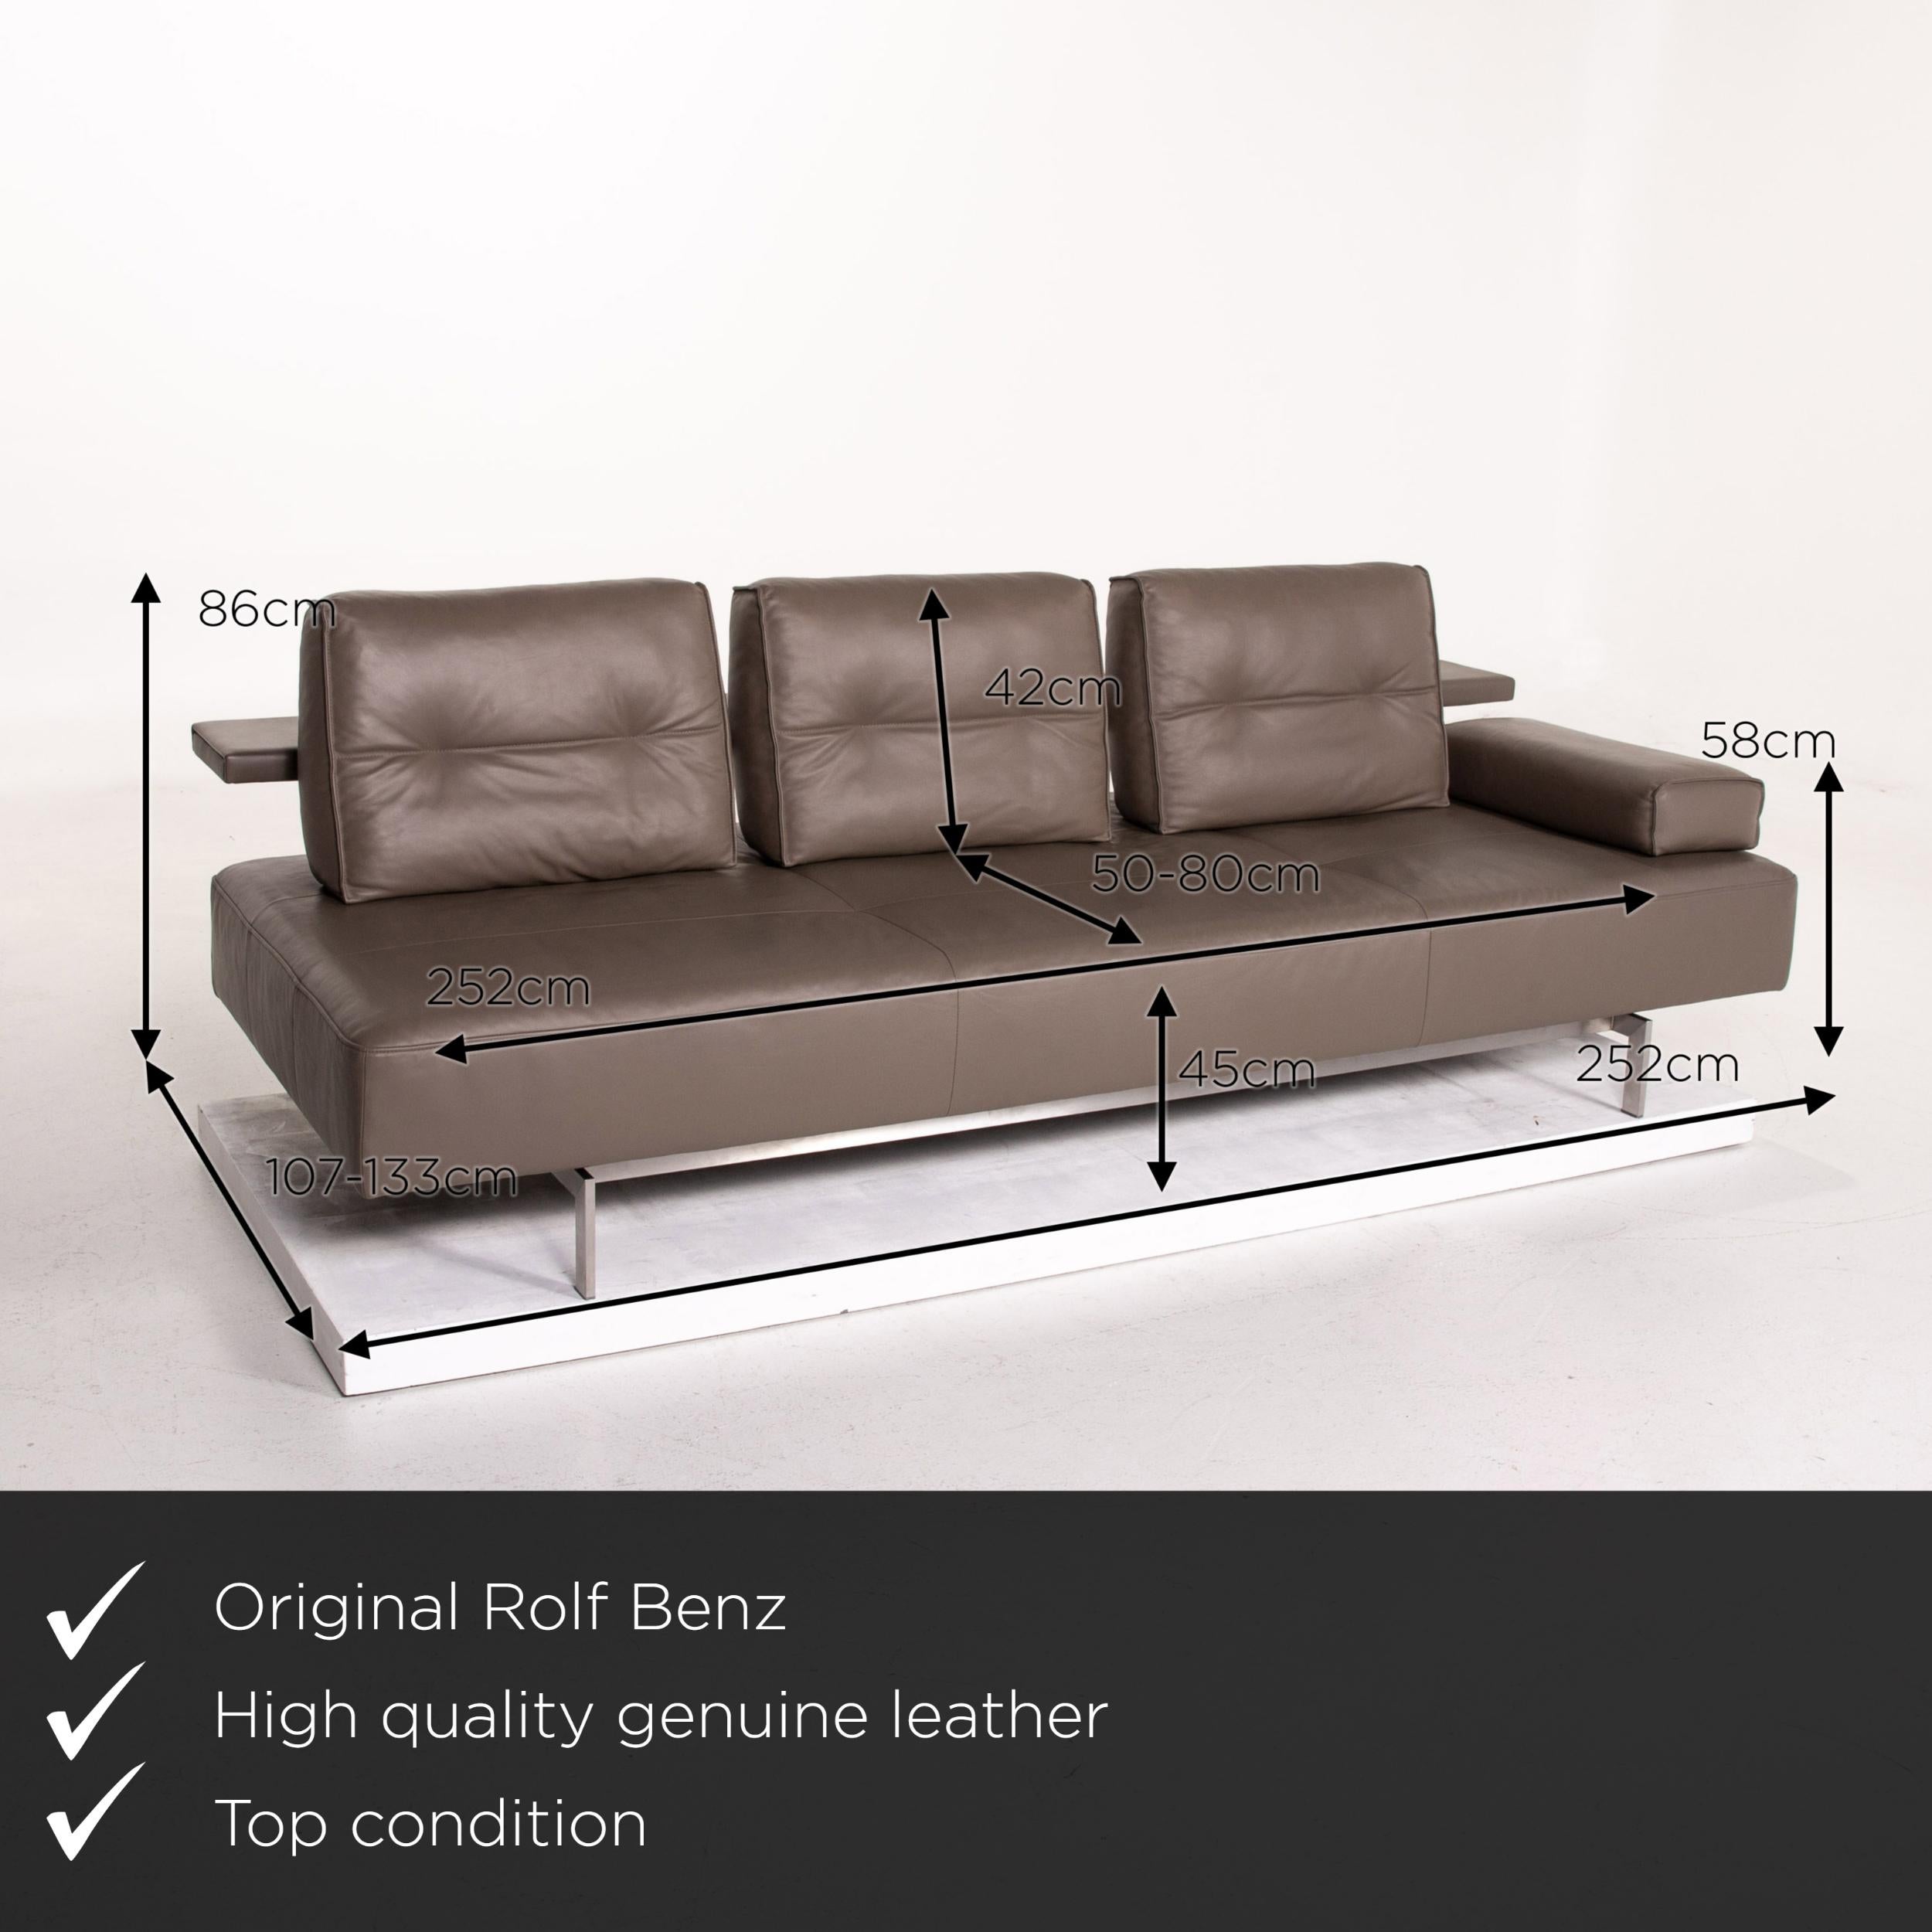 We present to you a Rolf Benz Dono leather sofa brown three-seat couch.

 

 Product measurements in centimeters:
 

Depth 107
Width 252
Height 86
Seat height 45
Rest height 58
Seat depth 50
Seat width 252
Back height 42.